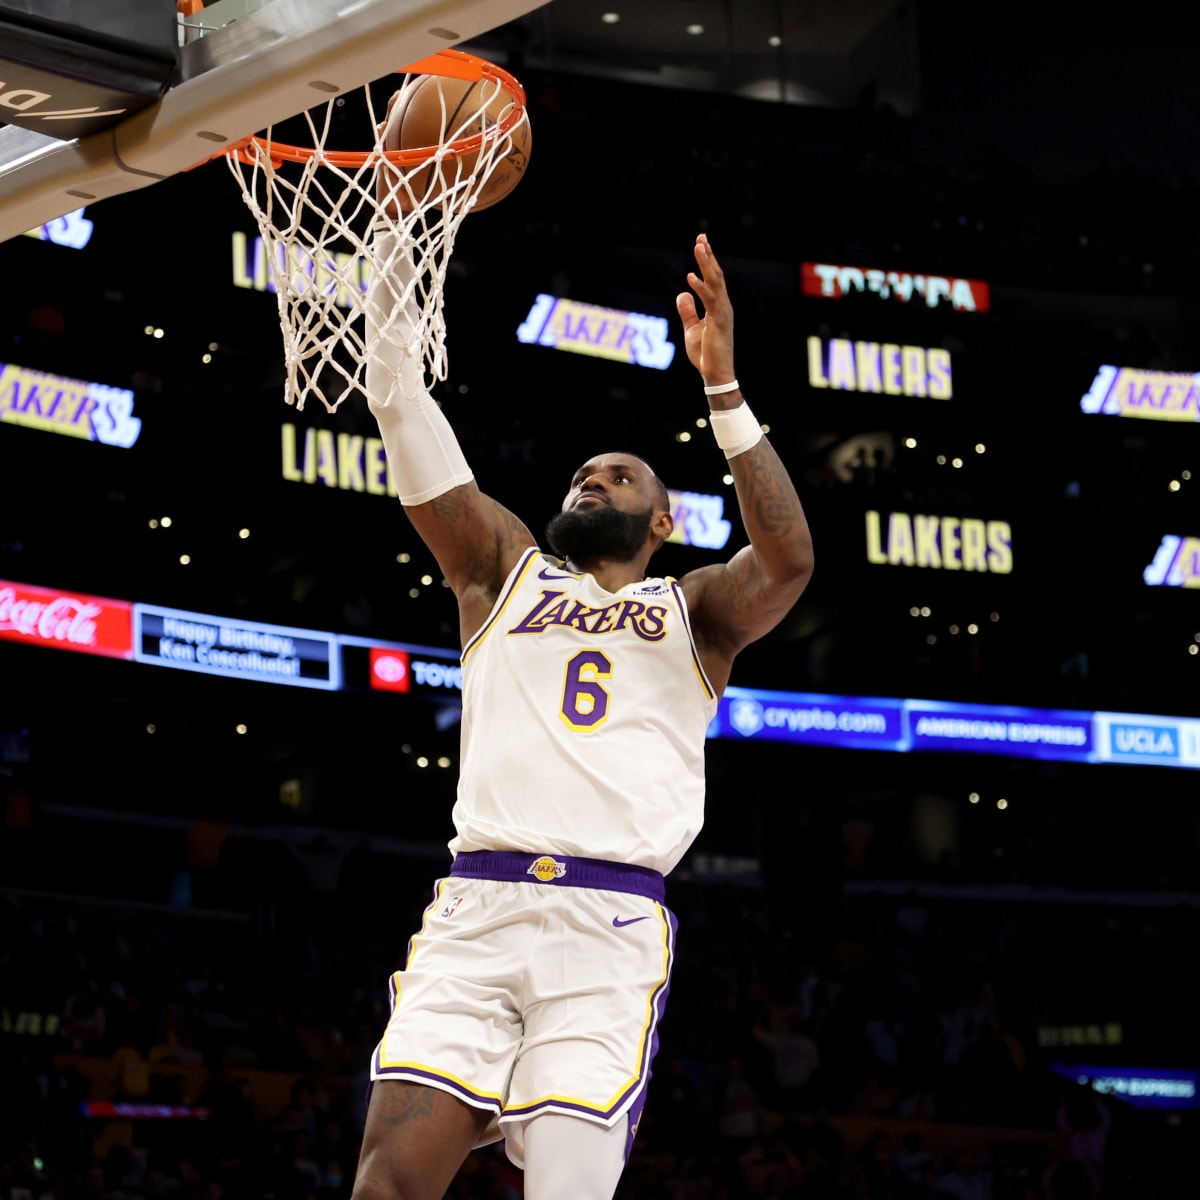 Cleveland Cavaliers Commentators Take Playful Shot At Lakers